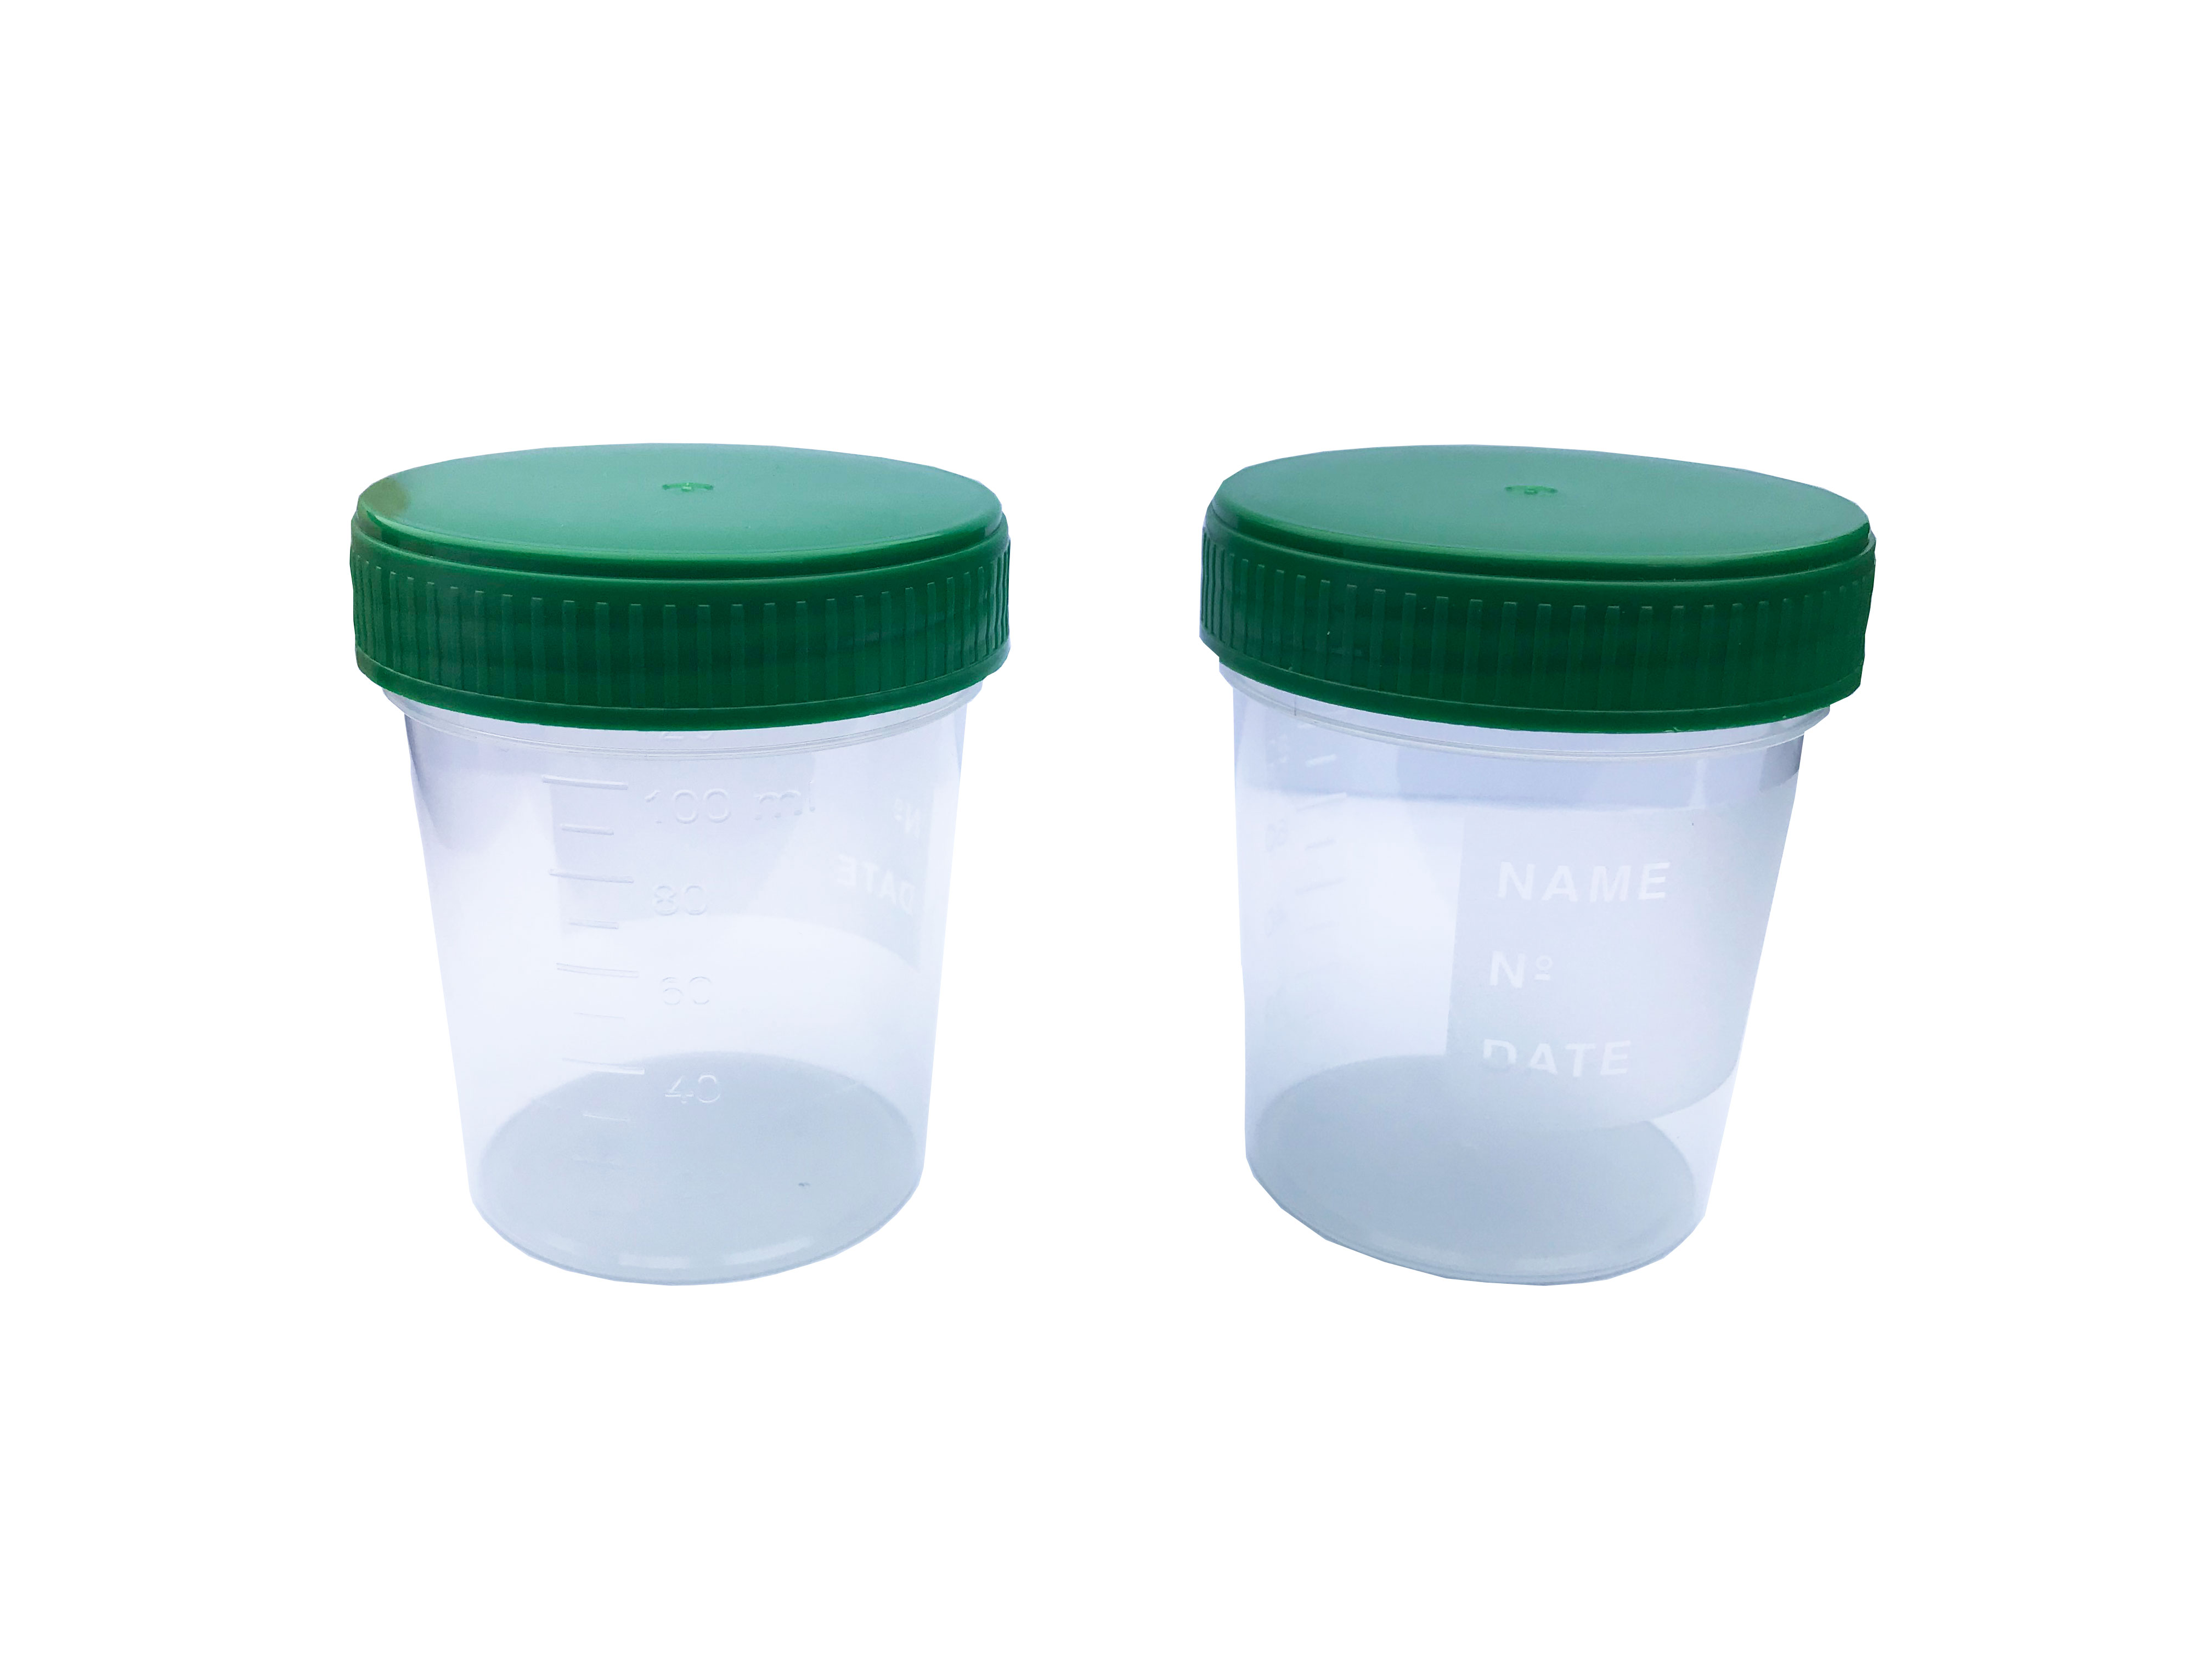 USC Romed urine sample container 120ml with lid to twist, 500 pcs in a carton.